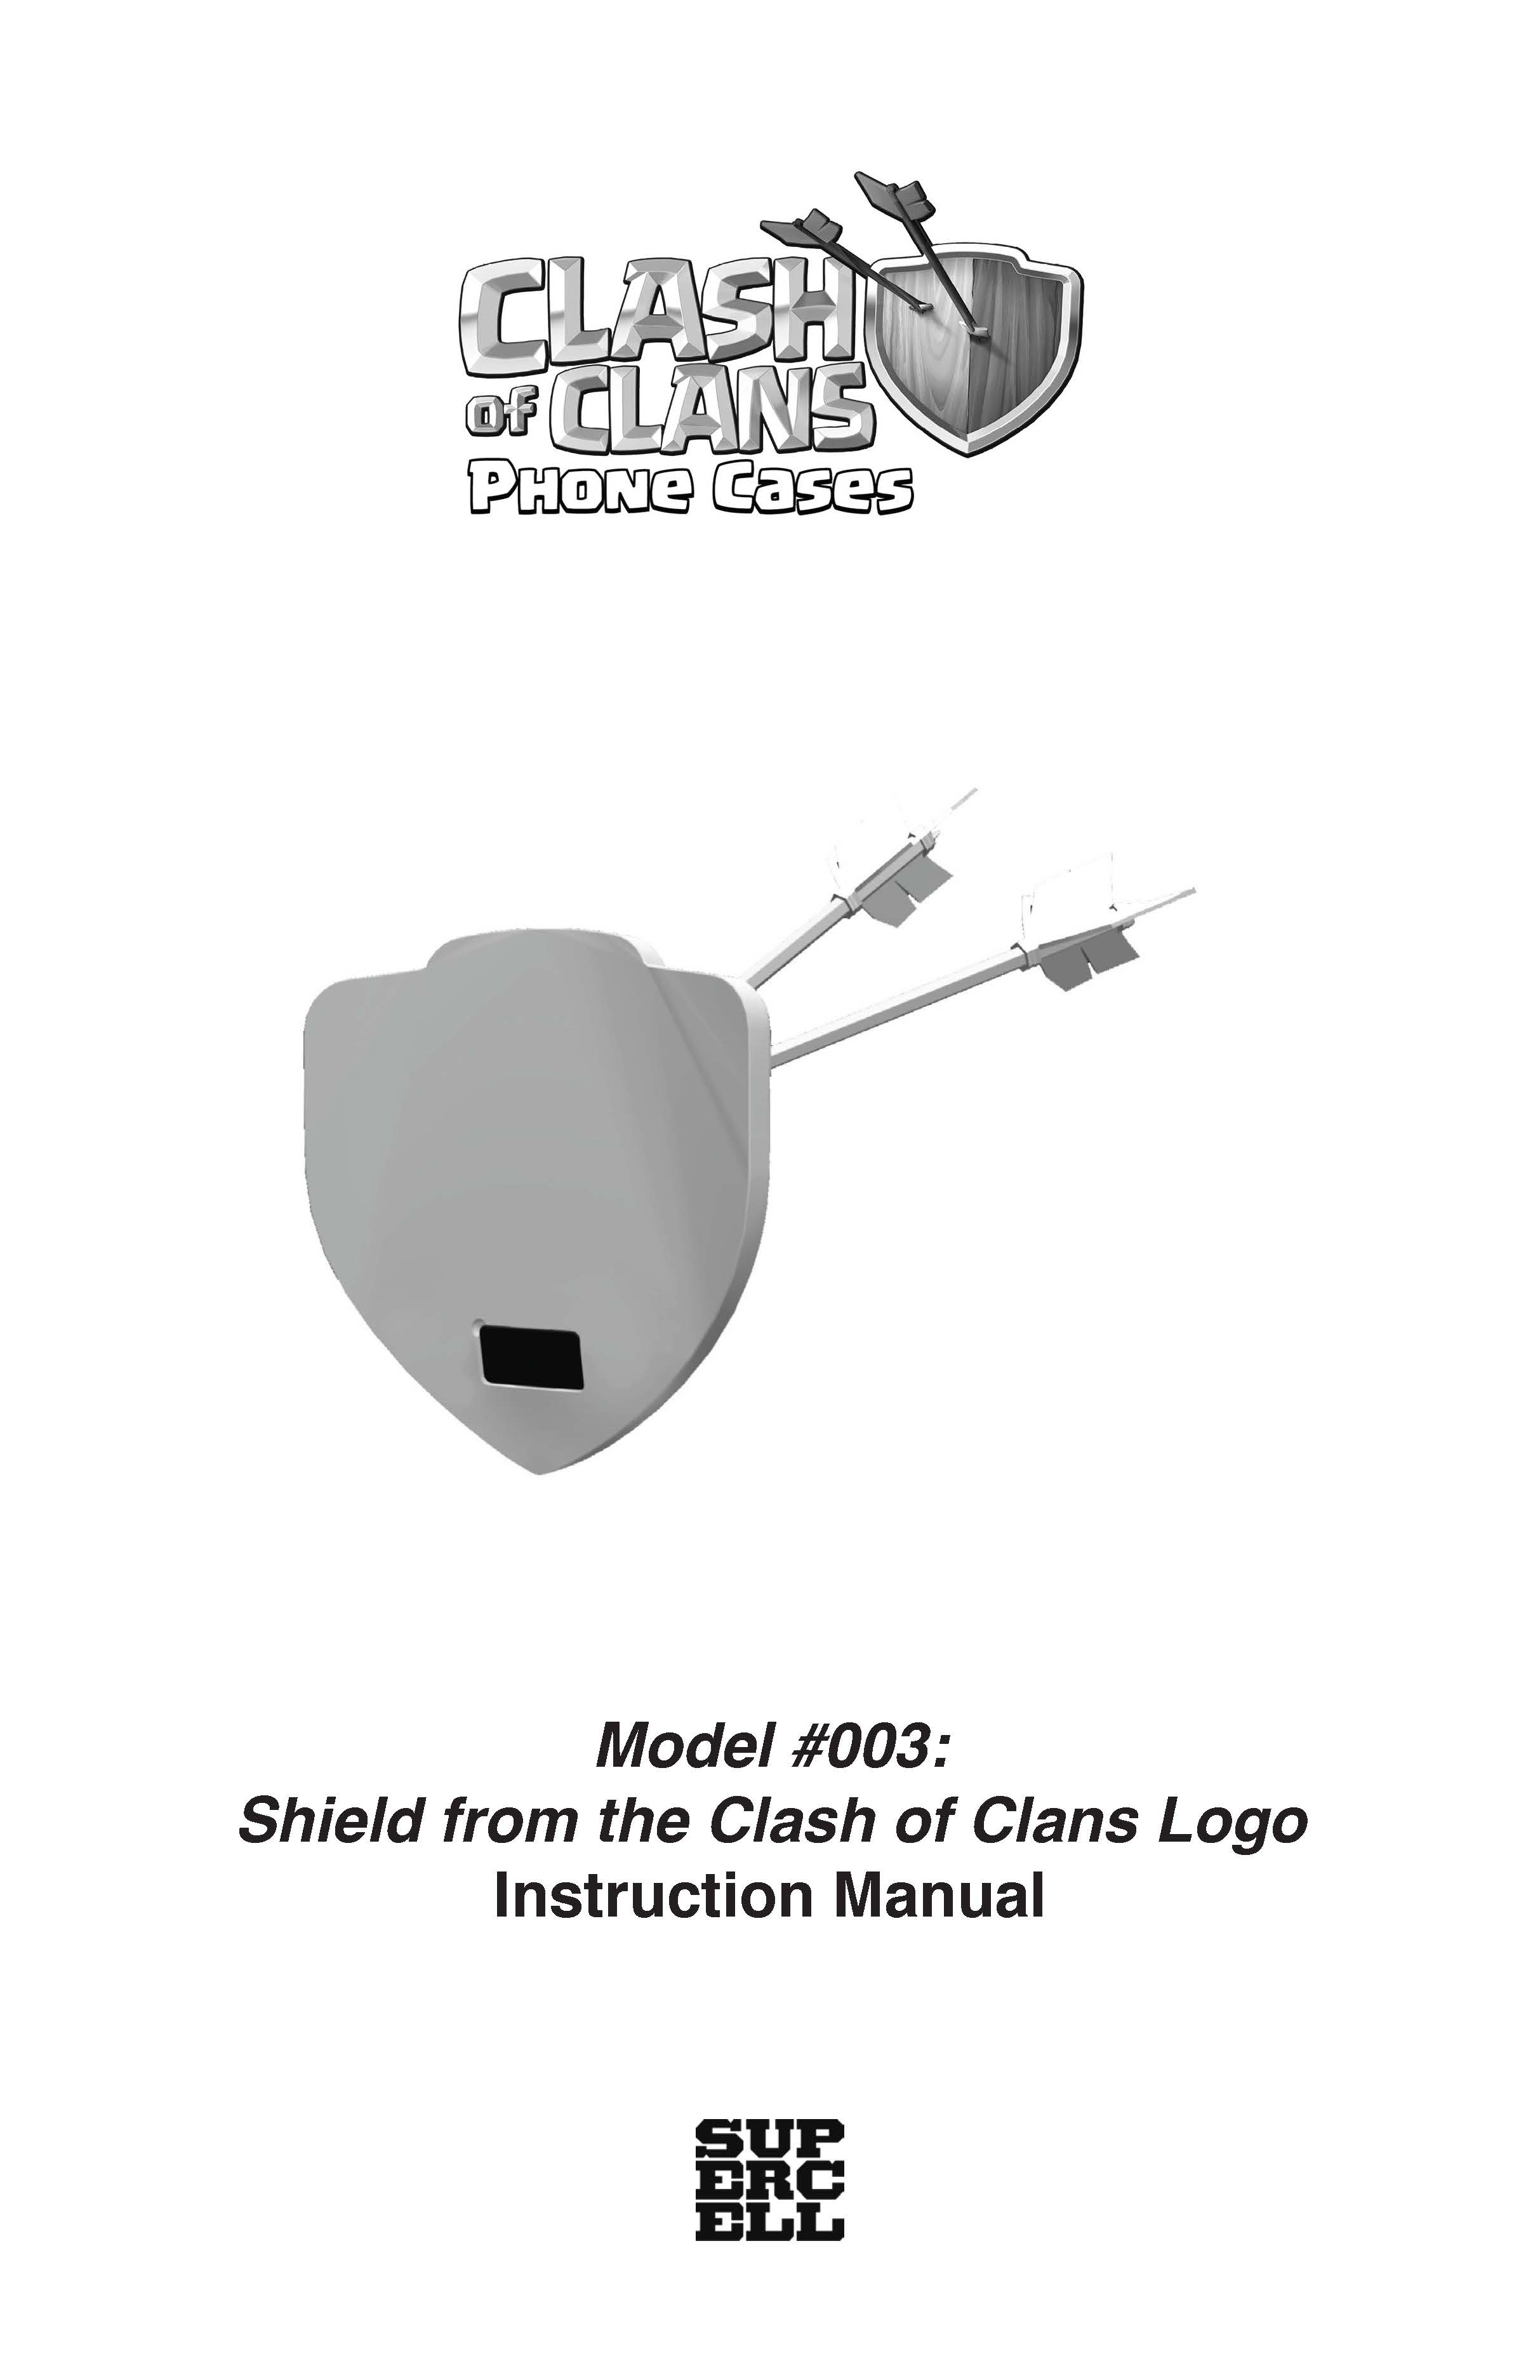 Clash-of-Clans-Phone-Cases-Instruction-Manual-Model-003-Shield-from-the-Clash-of-Clans-Logo_Page_1.jpg